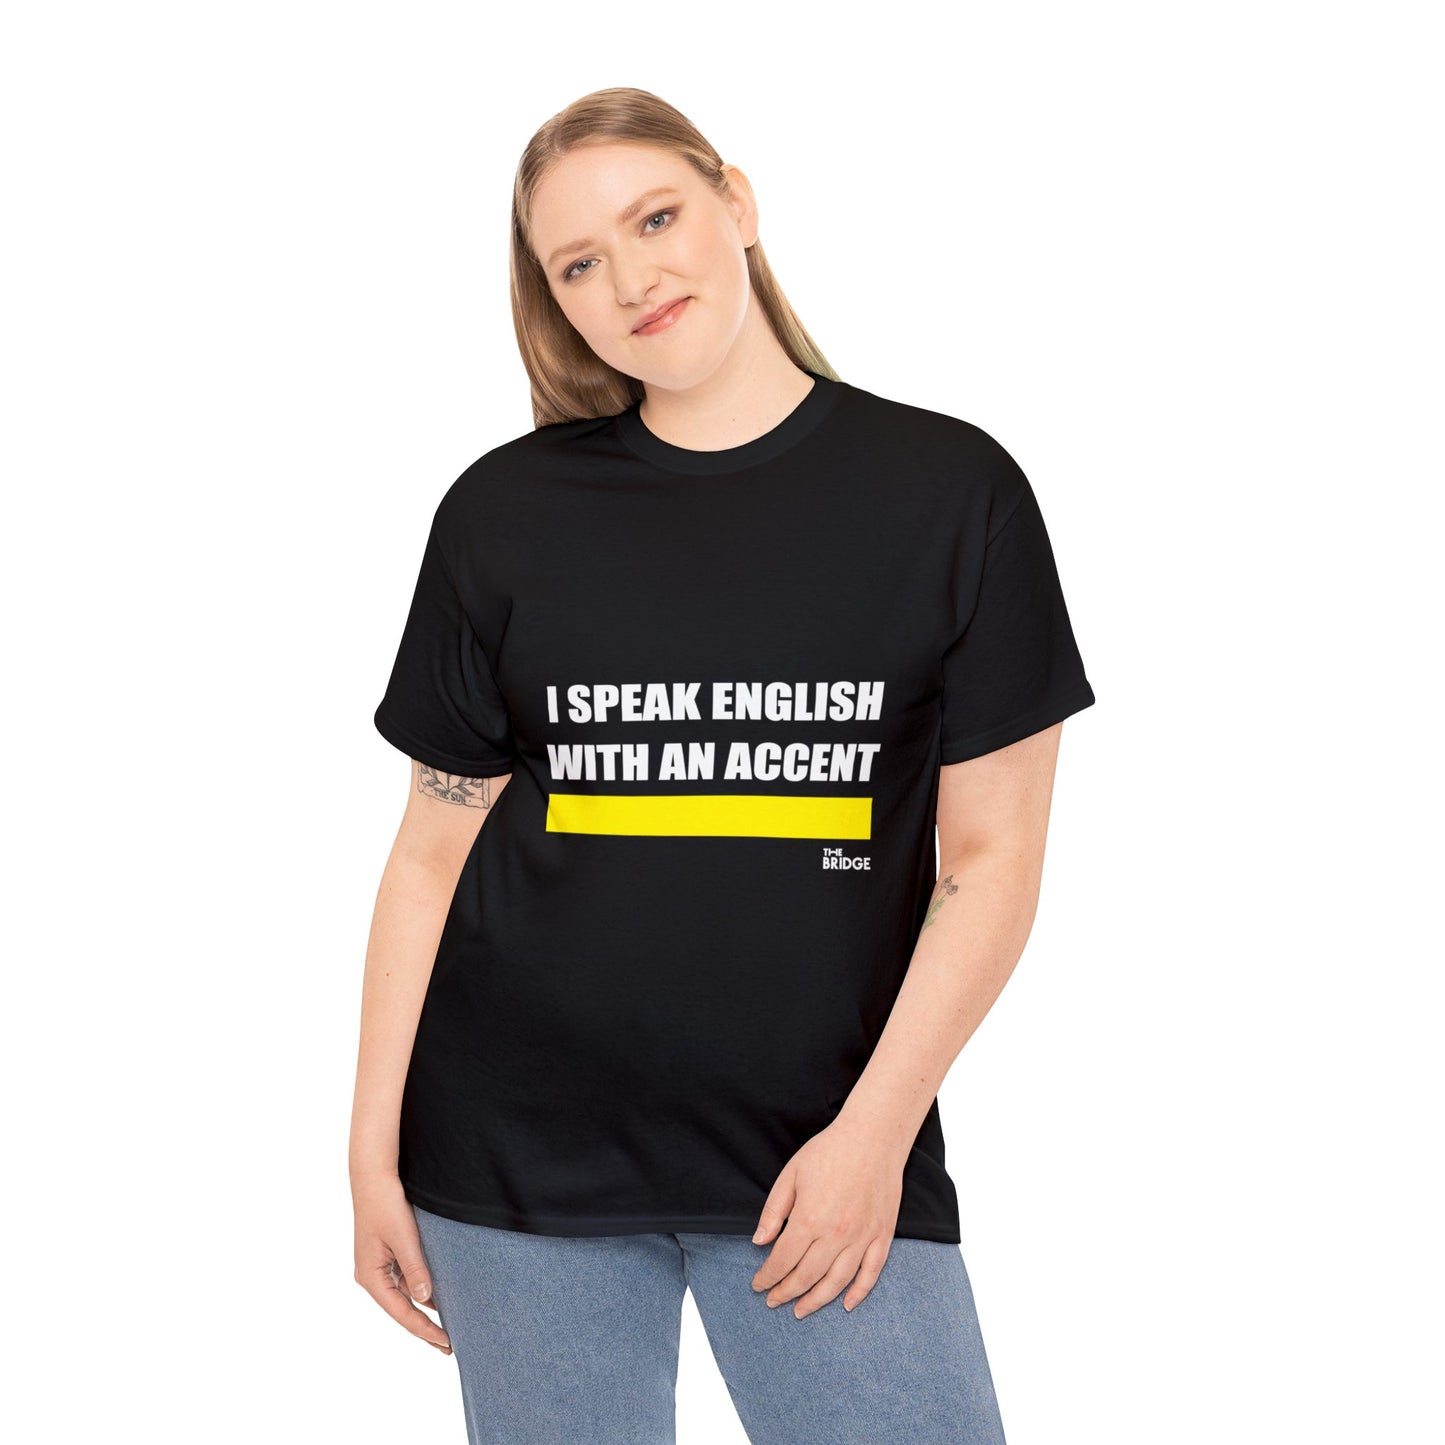 I SPEAK ENGLISH WITH AN ACCENT - BLACK T-SHIRT